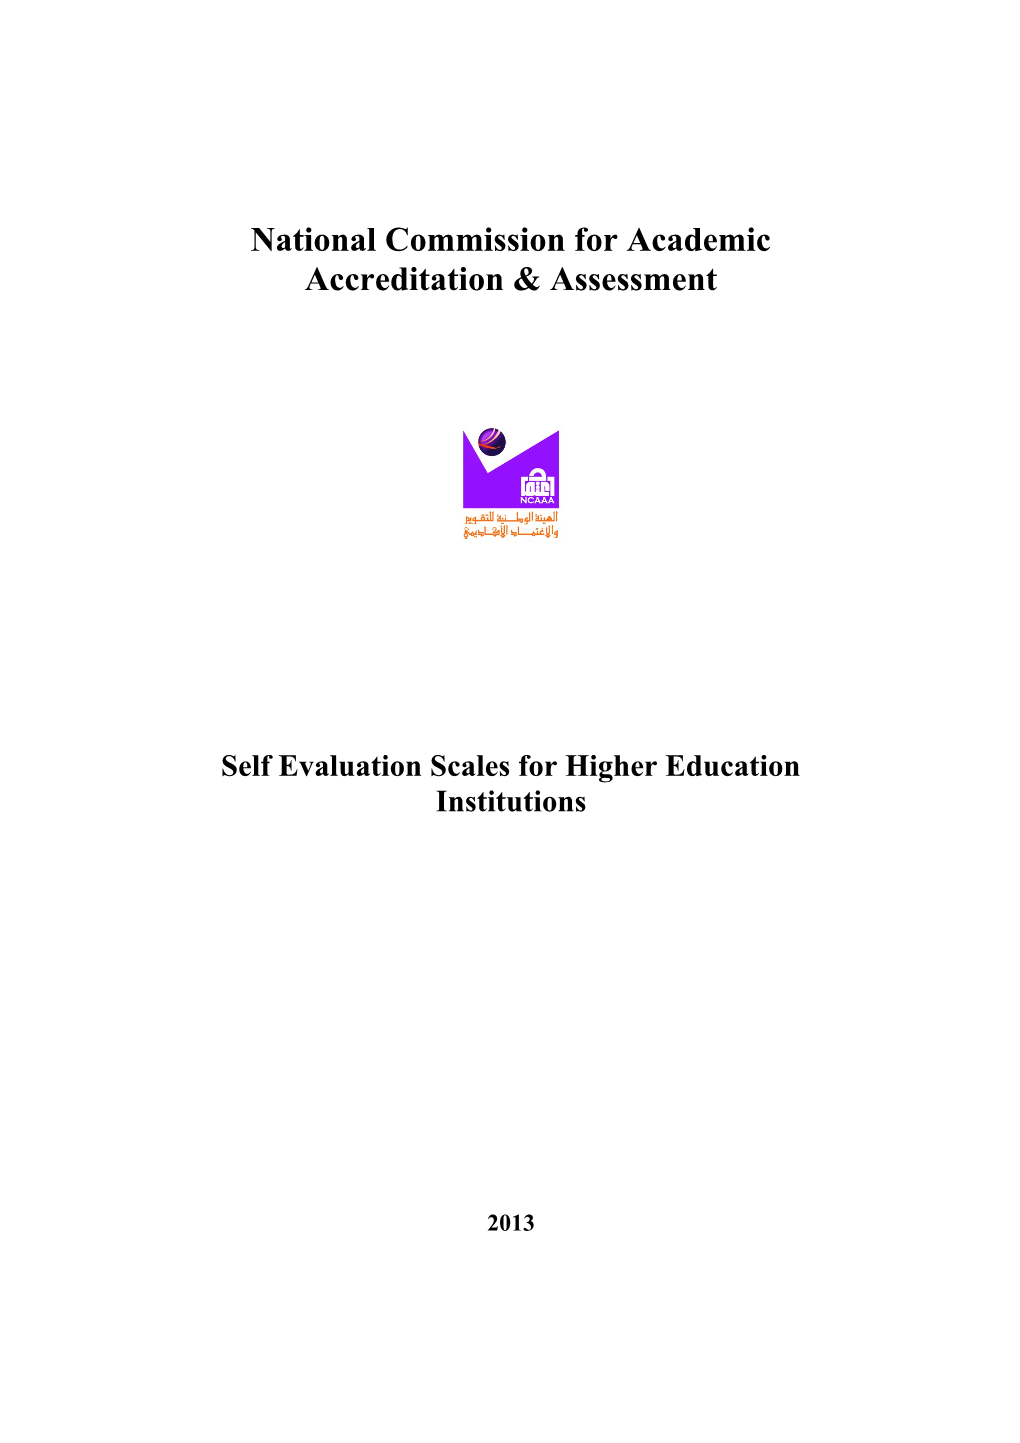 Quality Benchmarks for Post Secondary Institutions